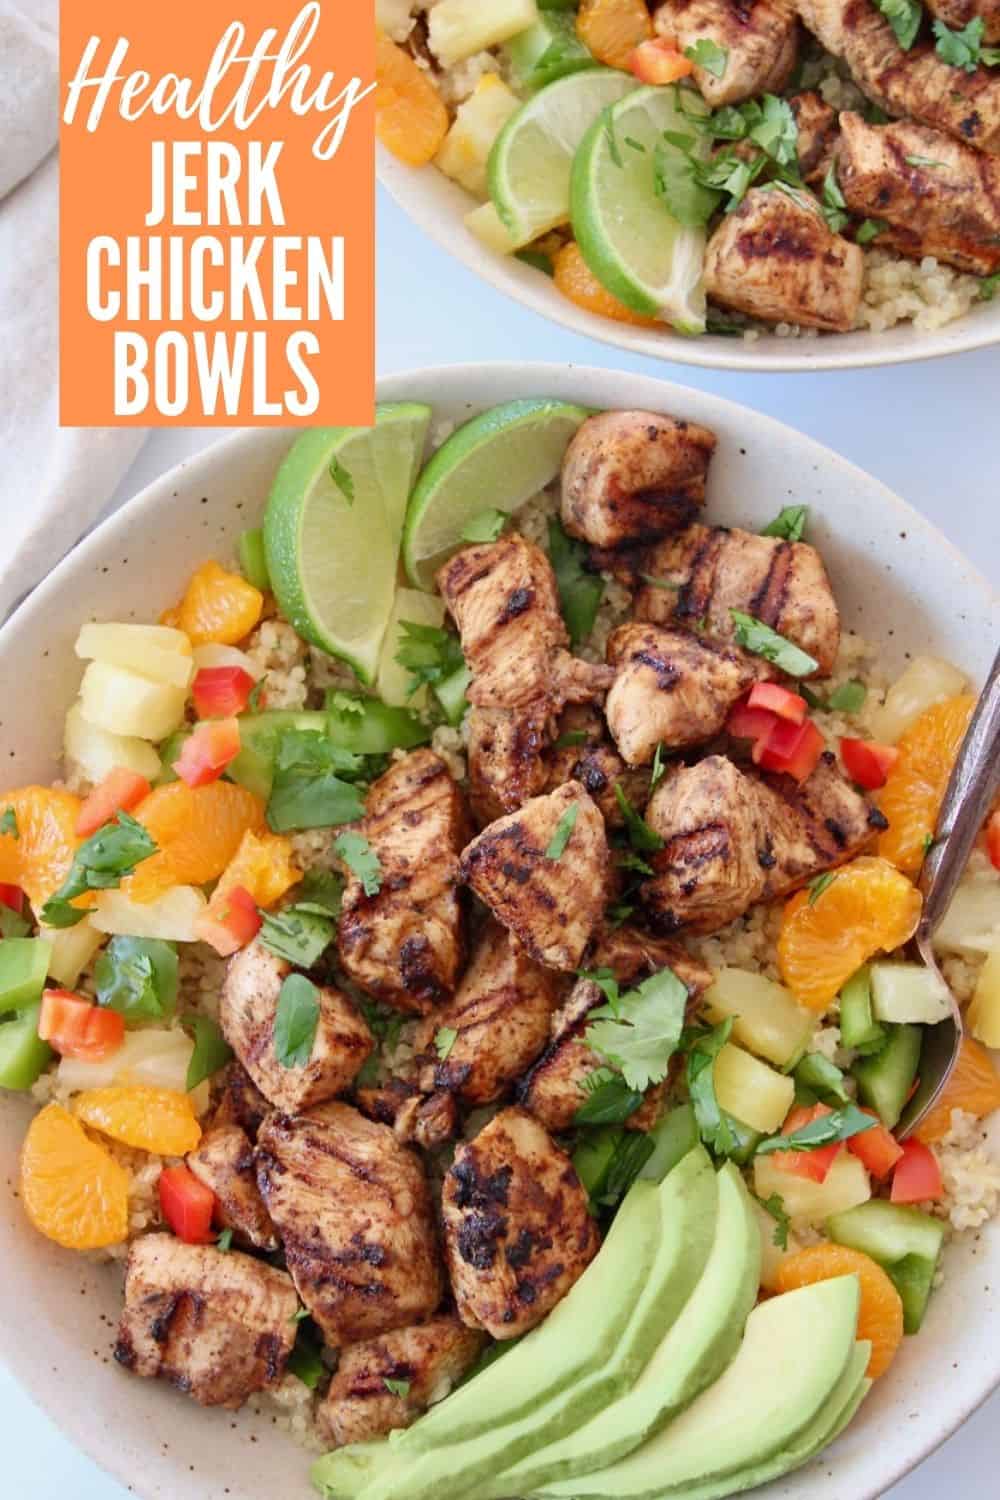 Caribbean Jerk Chicken Bowls - Bowls Are The New Plates